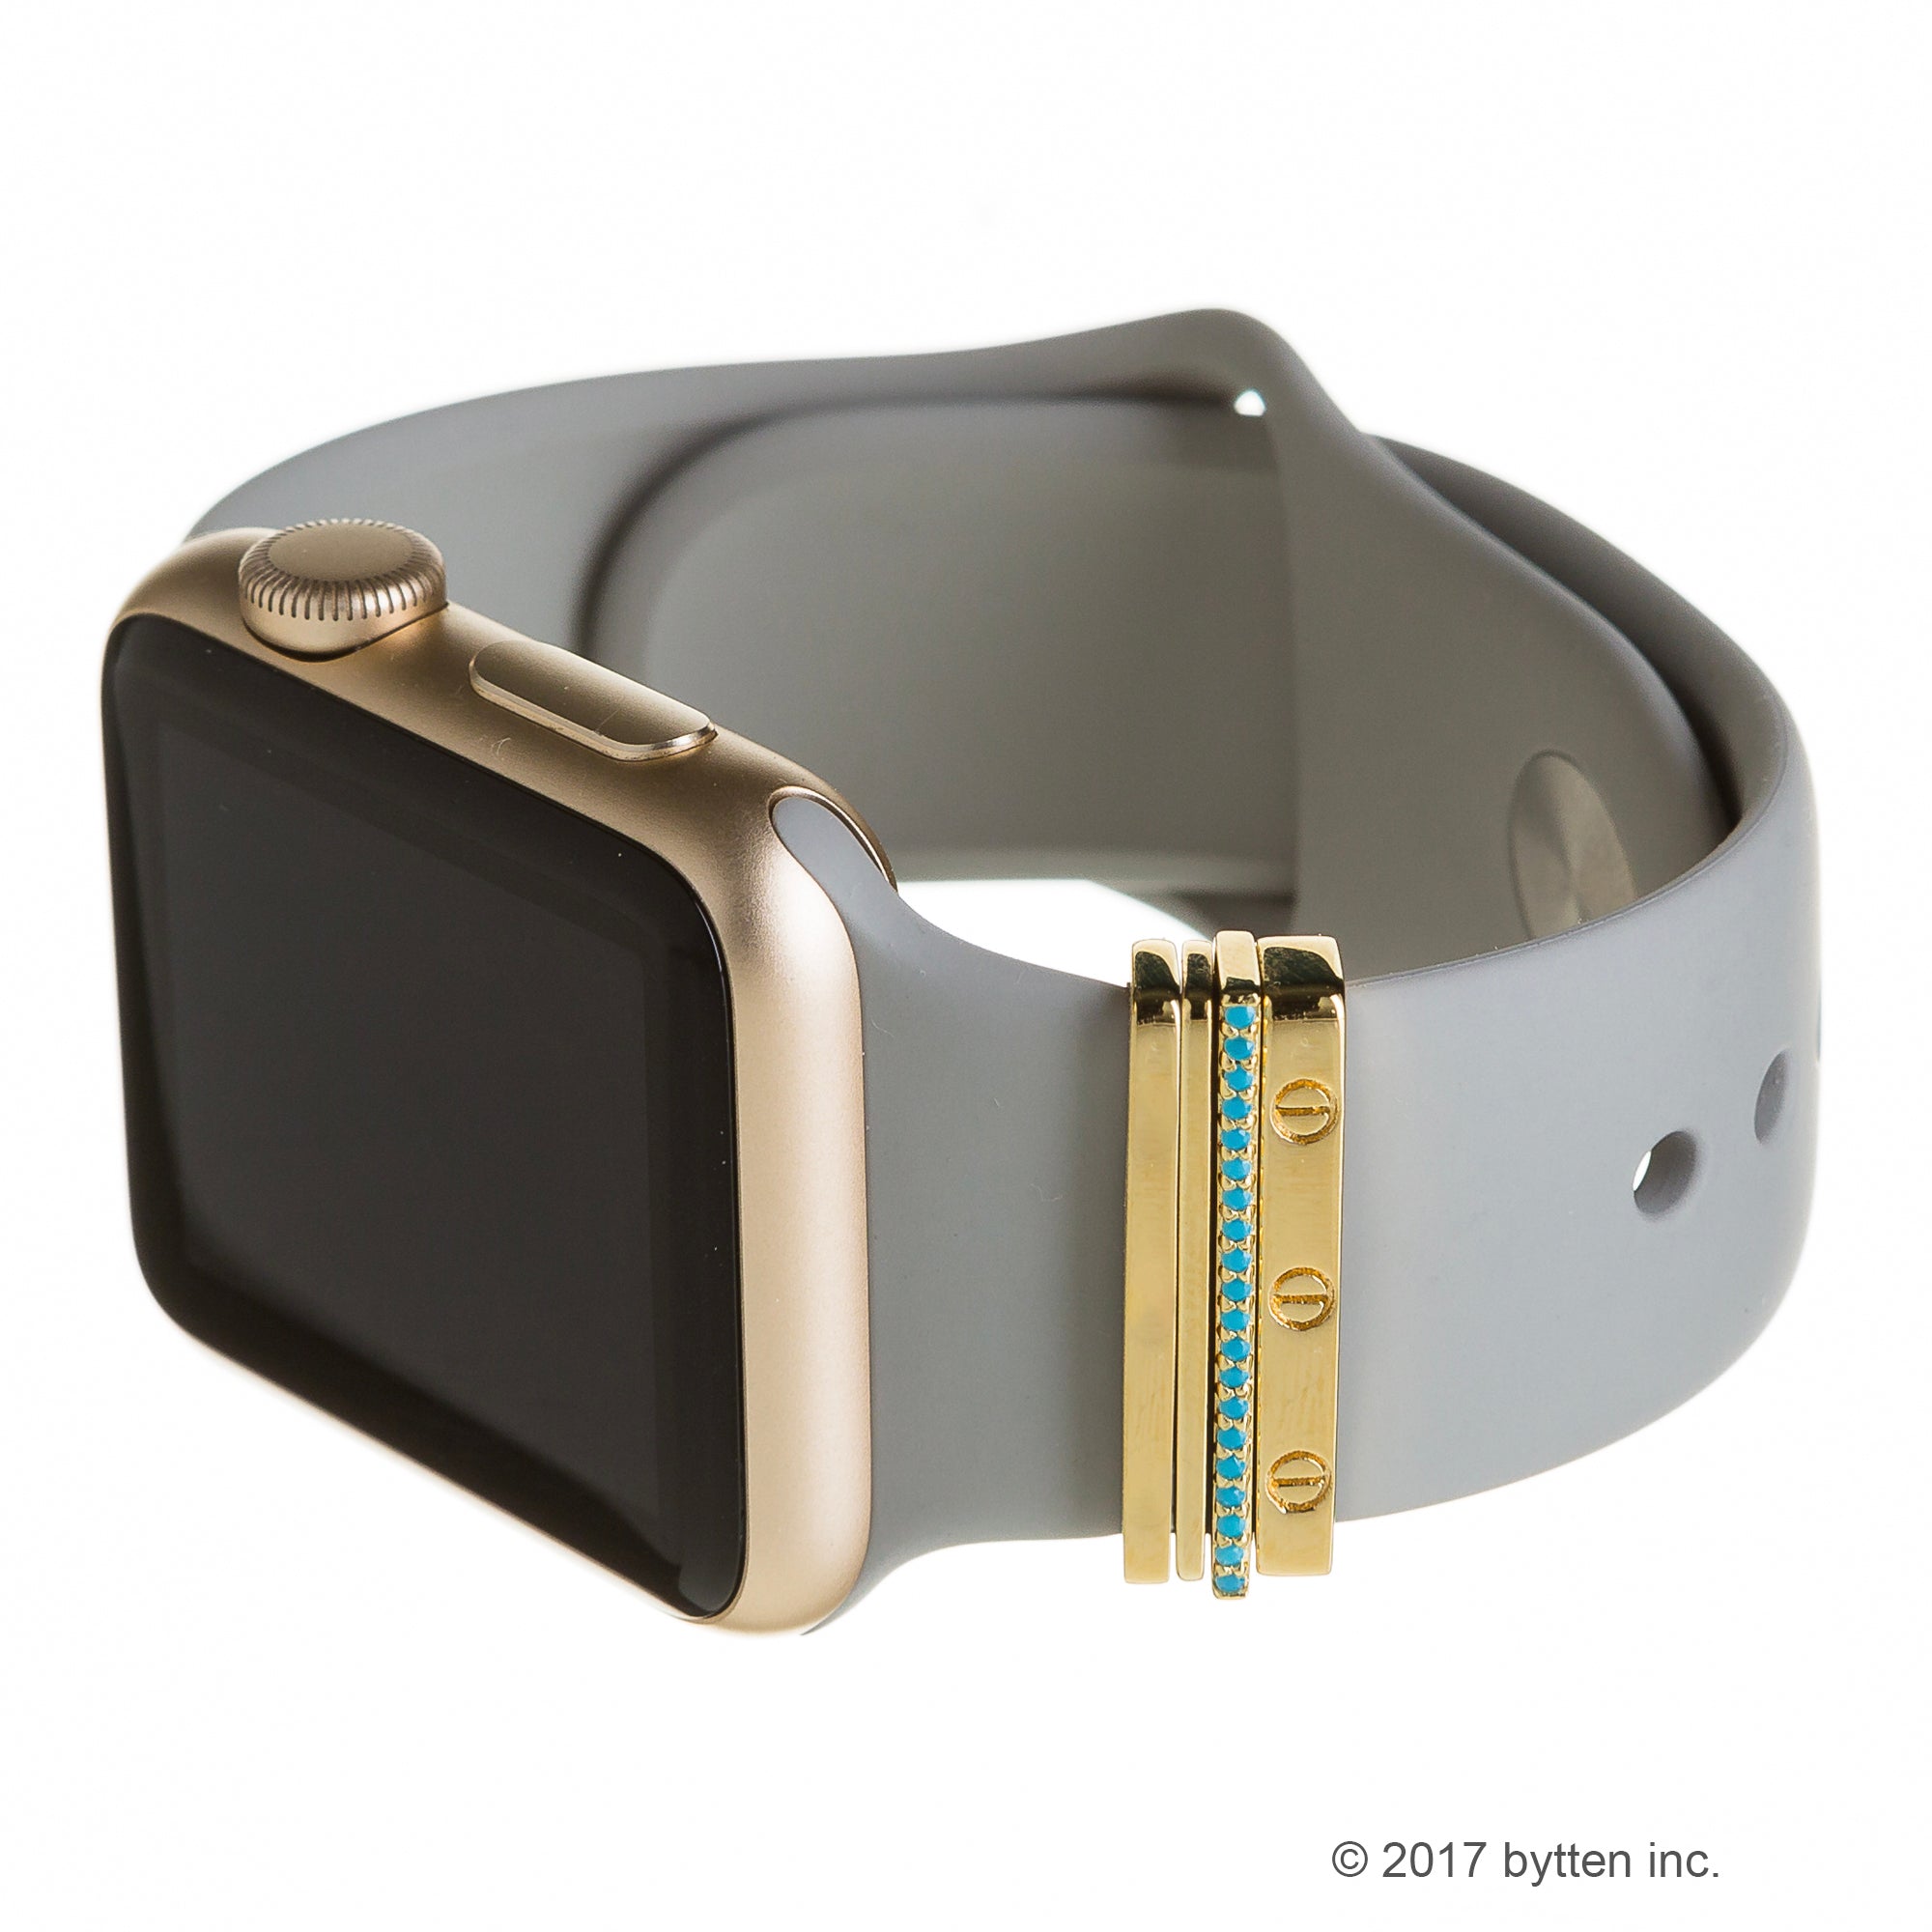 bytten gold azul stack on gold Apple Watch with french grey sport band